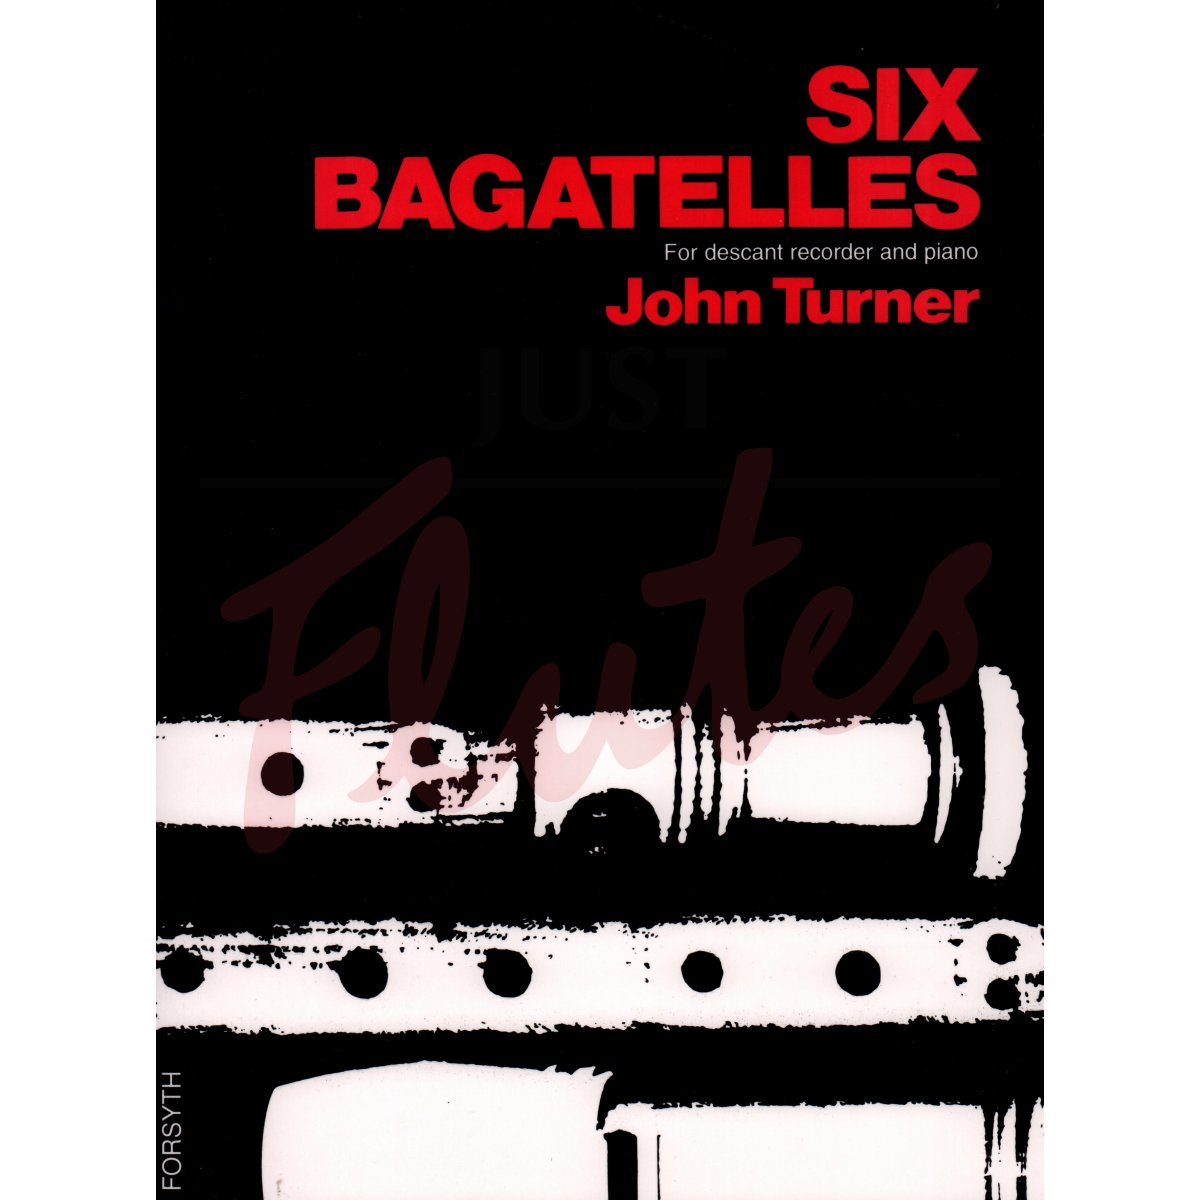 Six Bagatelles for Descant Recorder and Piano